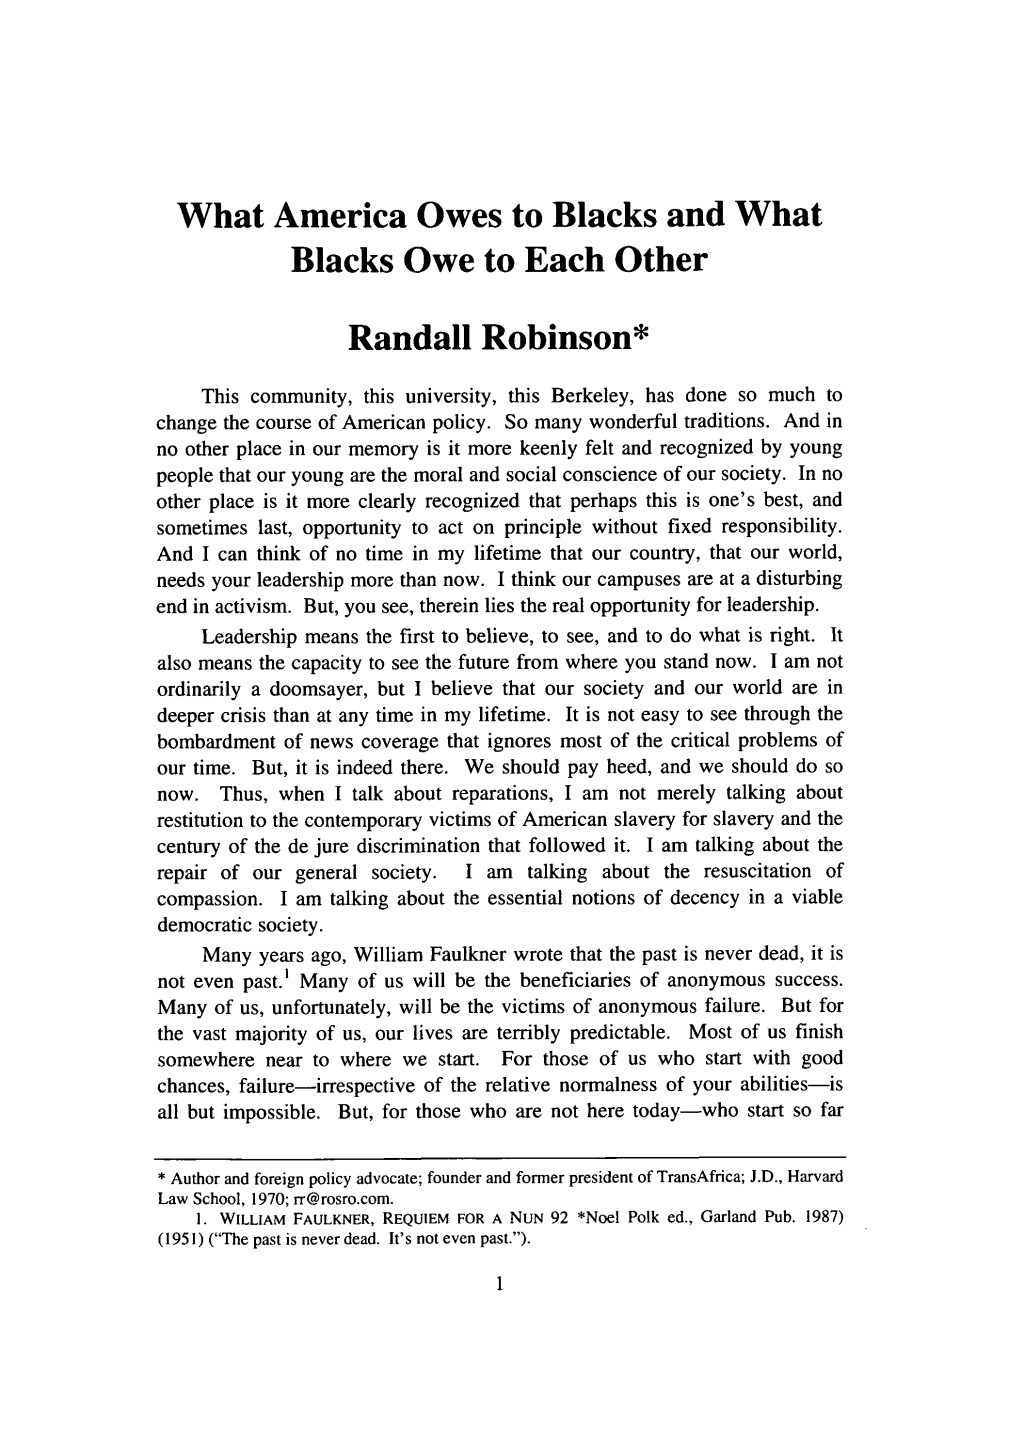 What America Owes to Blacks and What Blacks Owe to Each Other